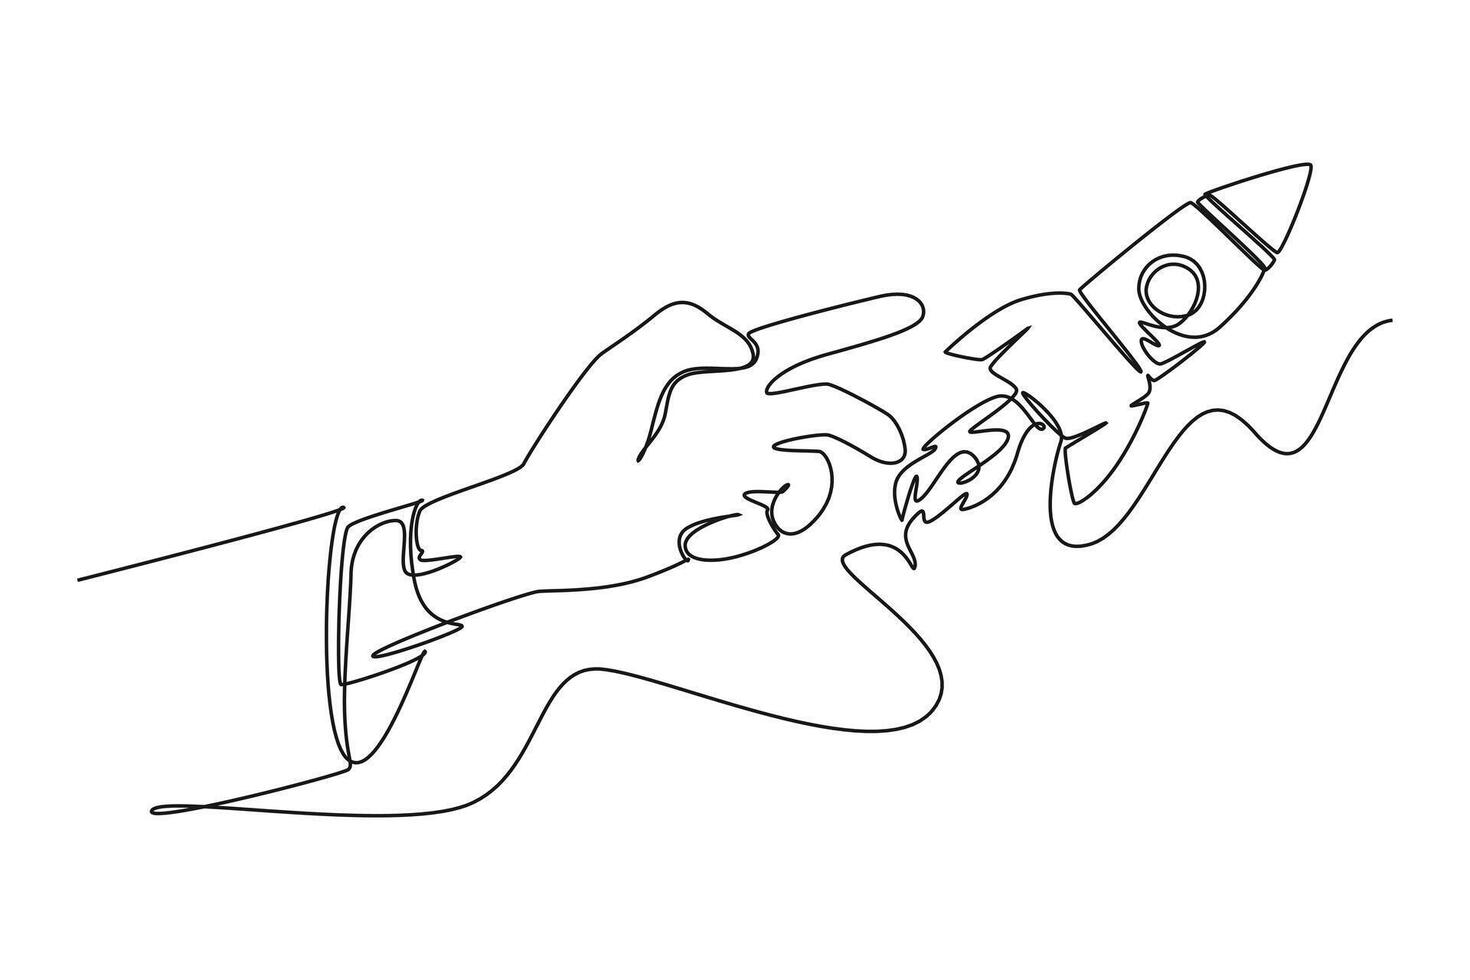 Continuous one line drawing business technology concept. Doodle vector illustration.